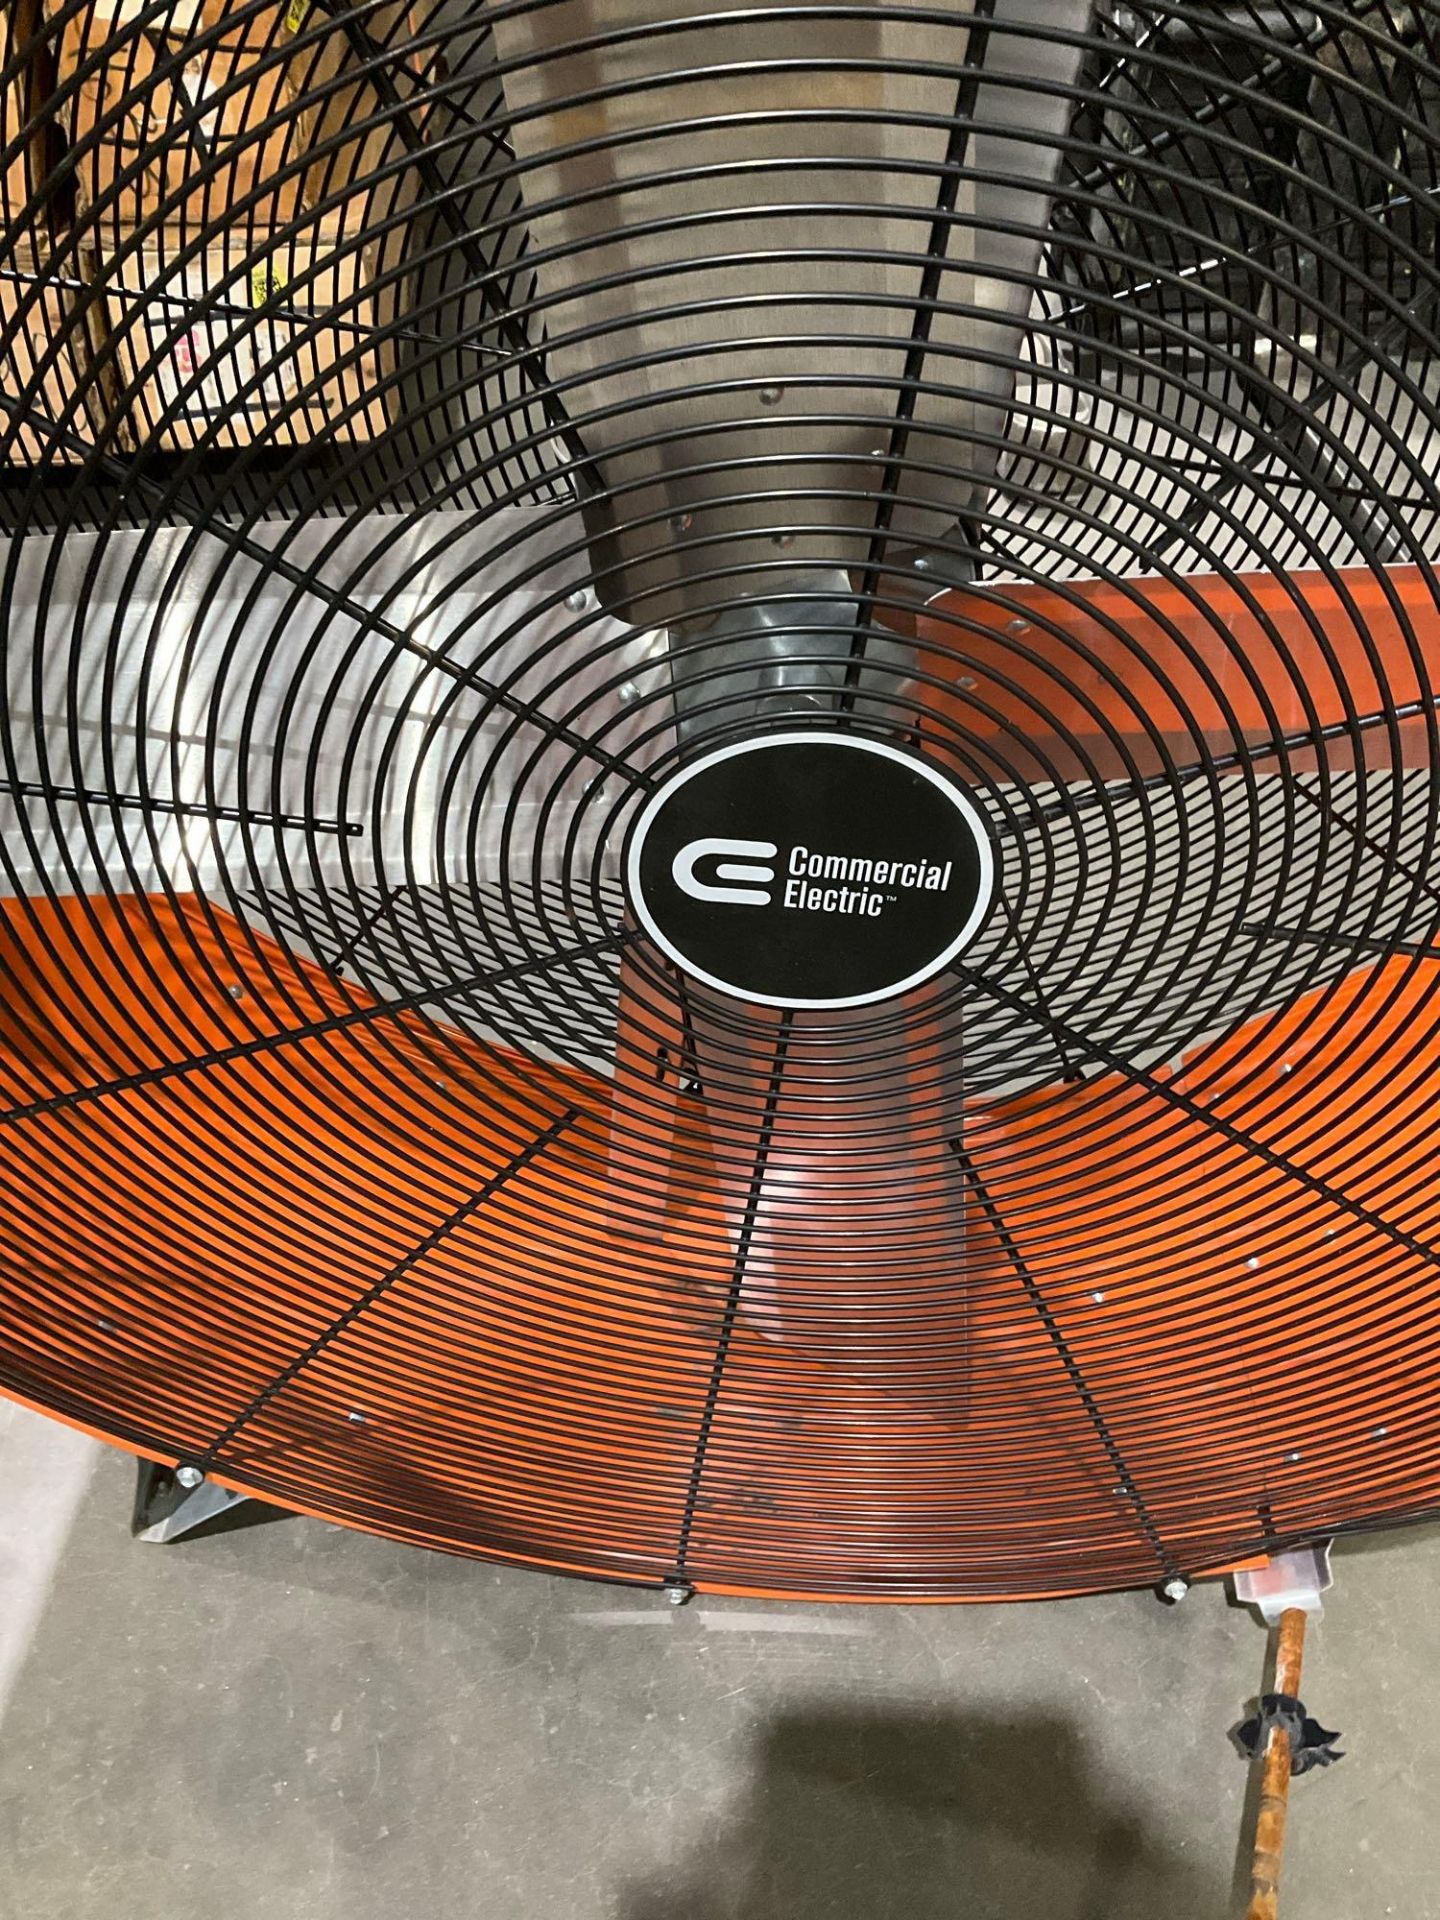 UNUSED 42" COMMERCIAL ELECTRIC PORTABLE BARREL FAN - Image 2 of 8